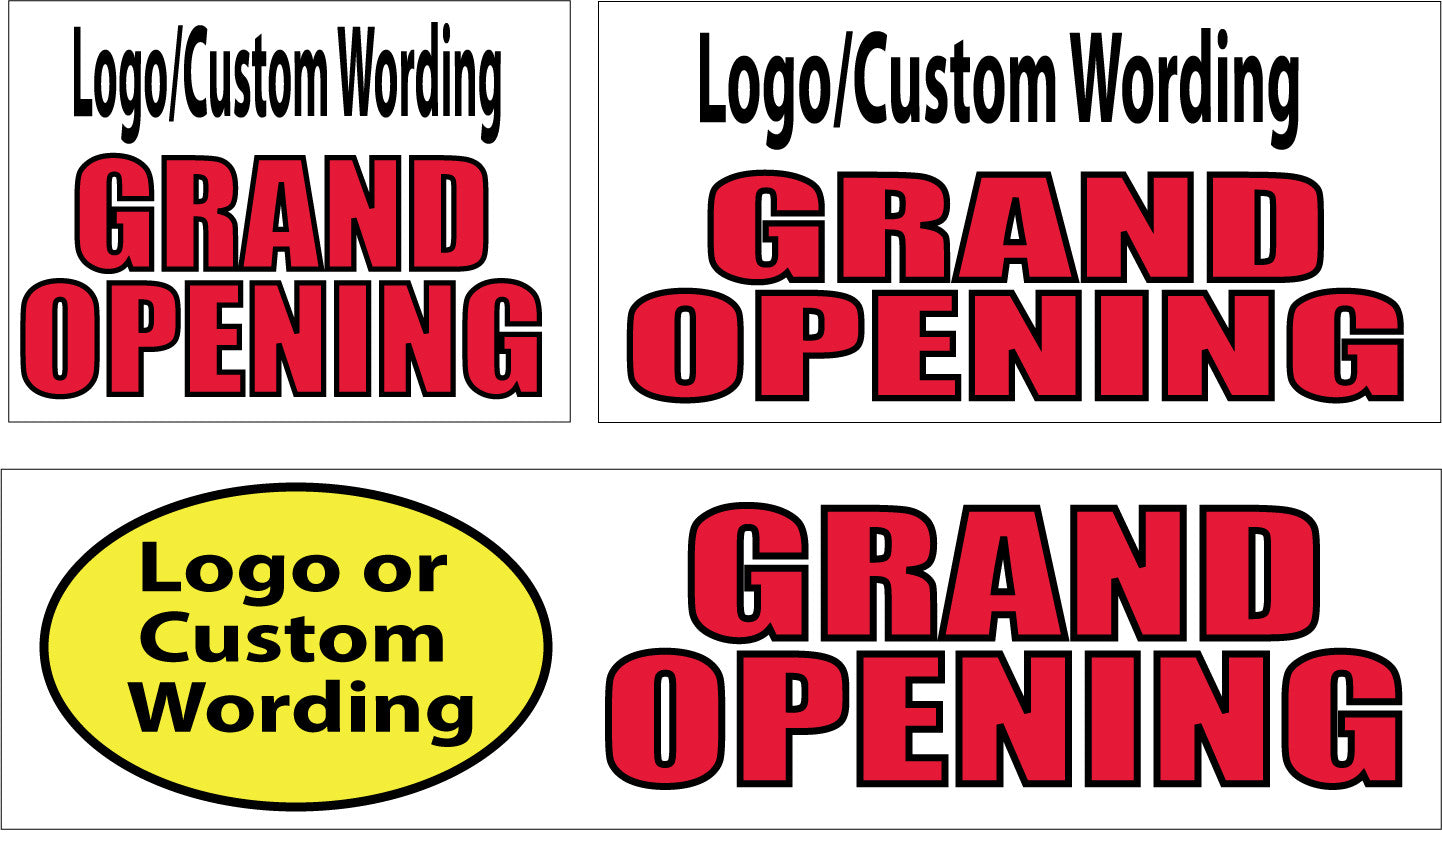 Grand Opening with Logo/Wording